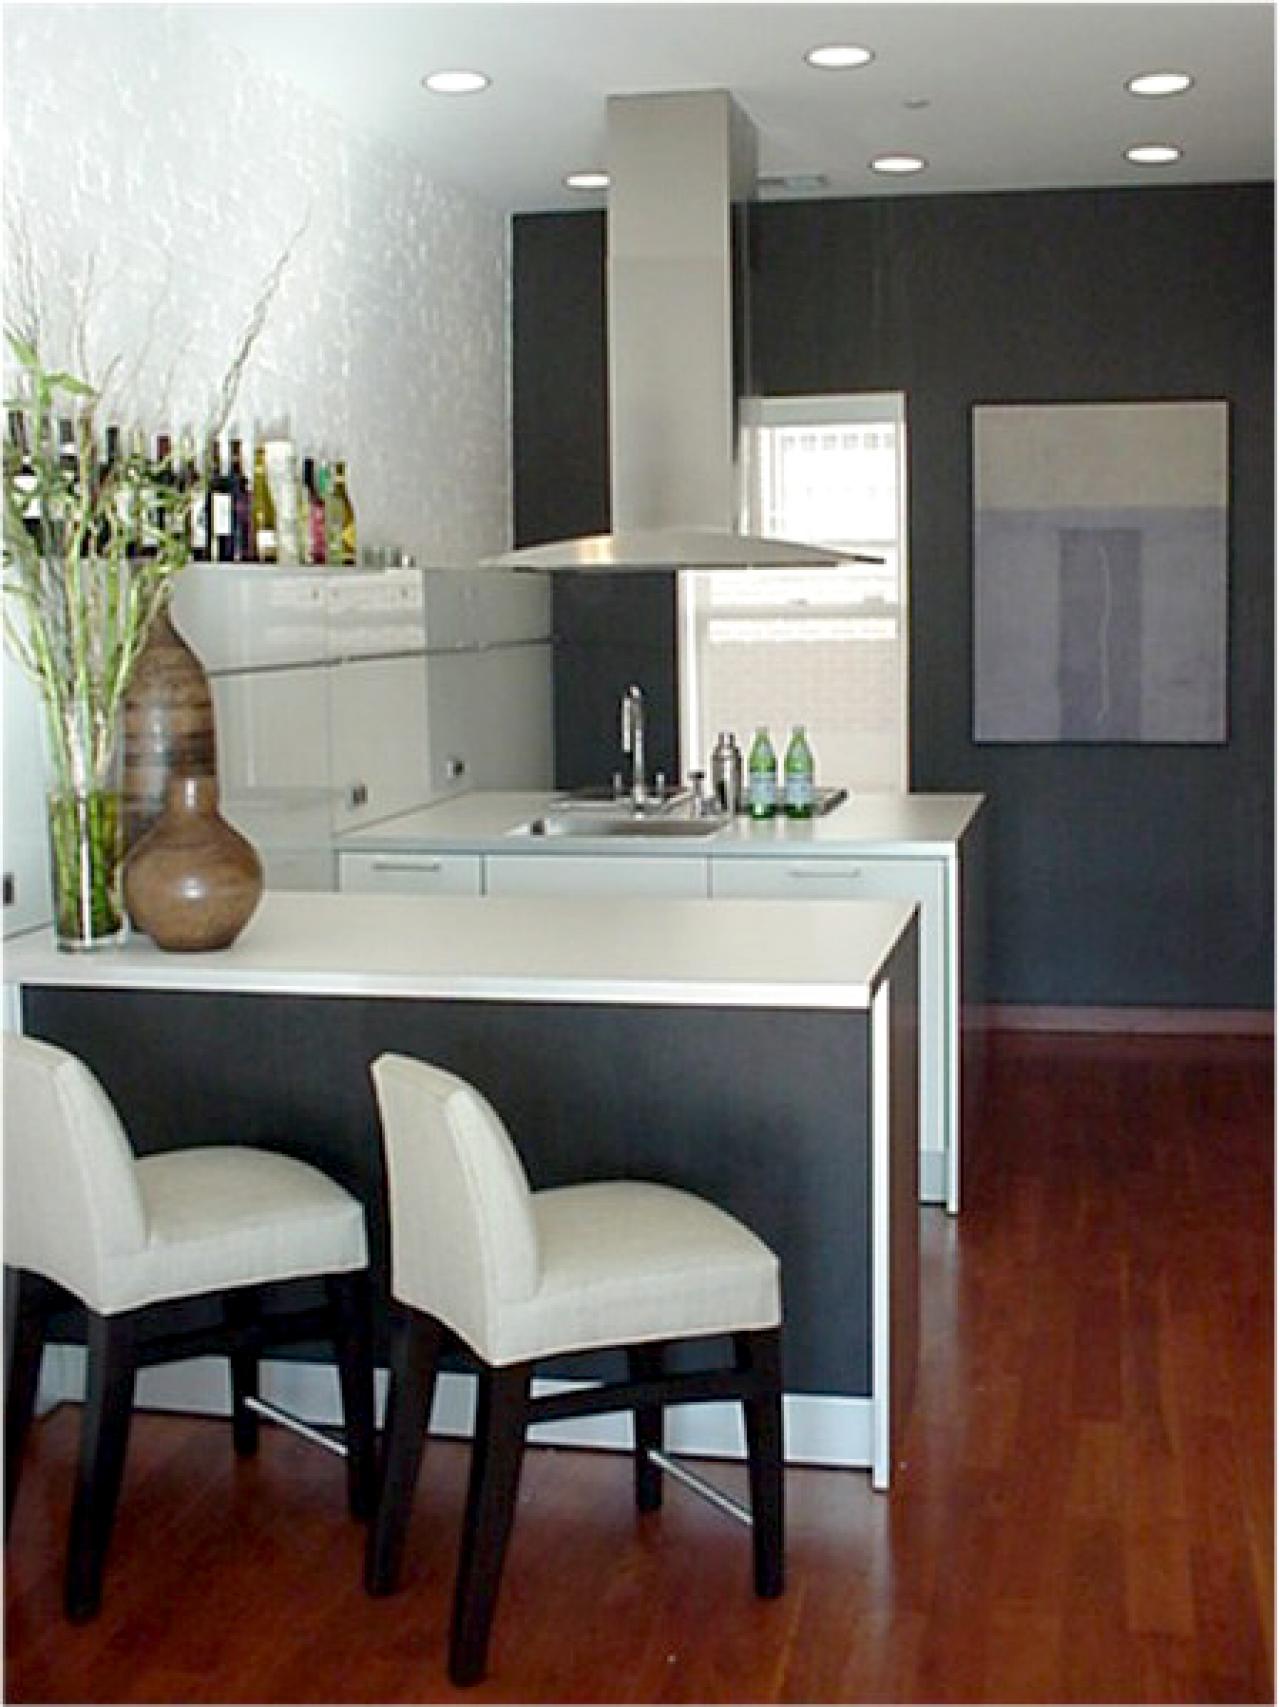 Style Guide For A Contemporary Kitchen Hgtv